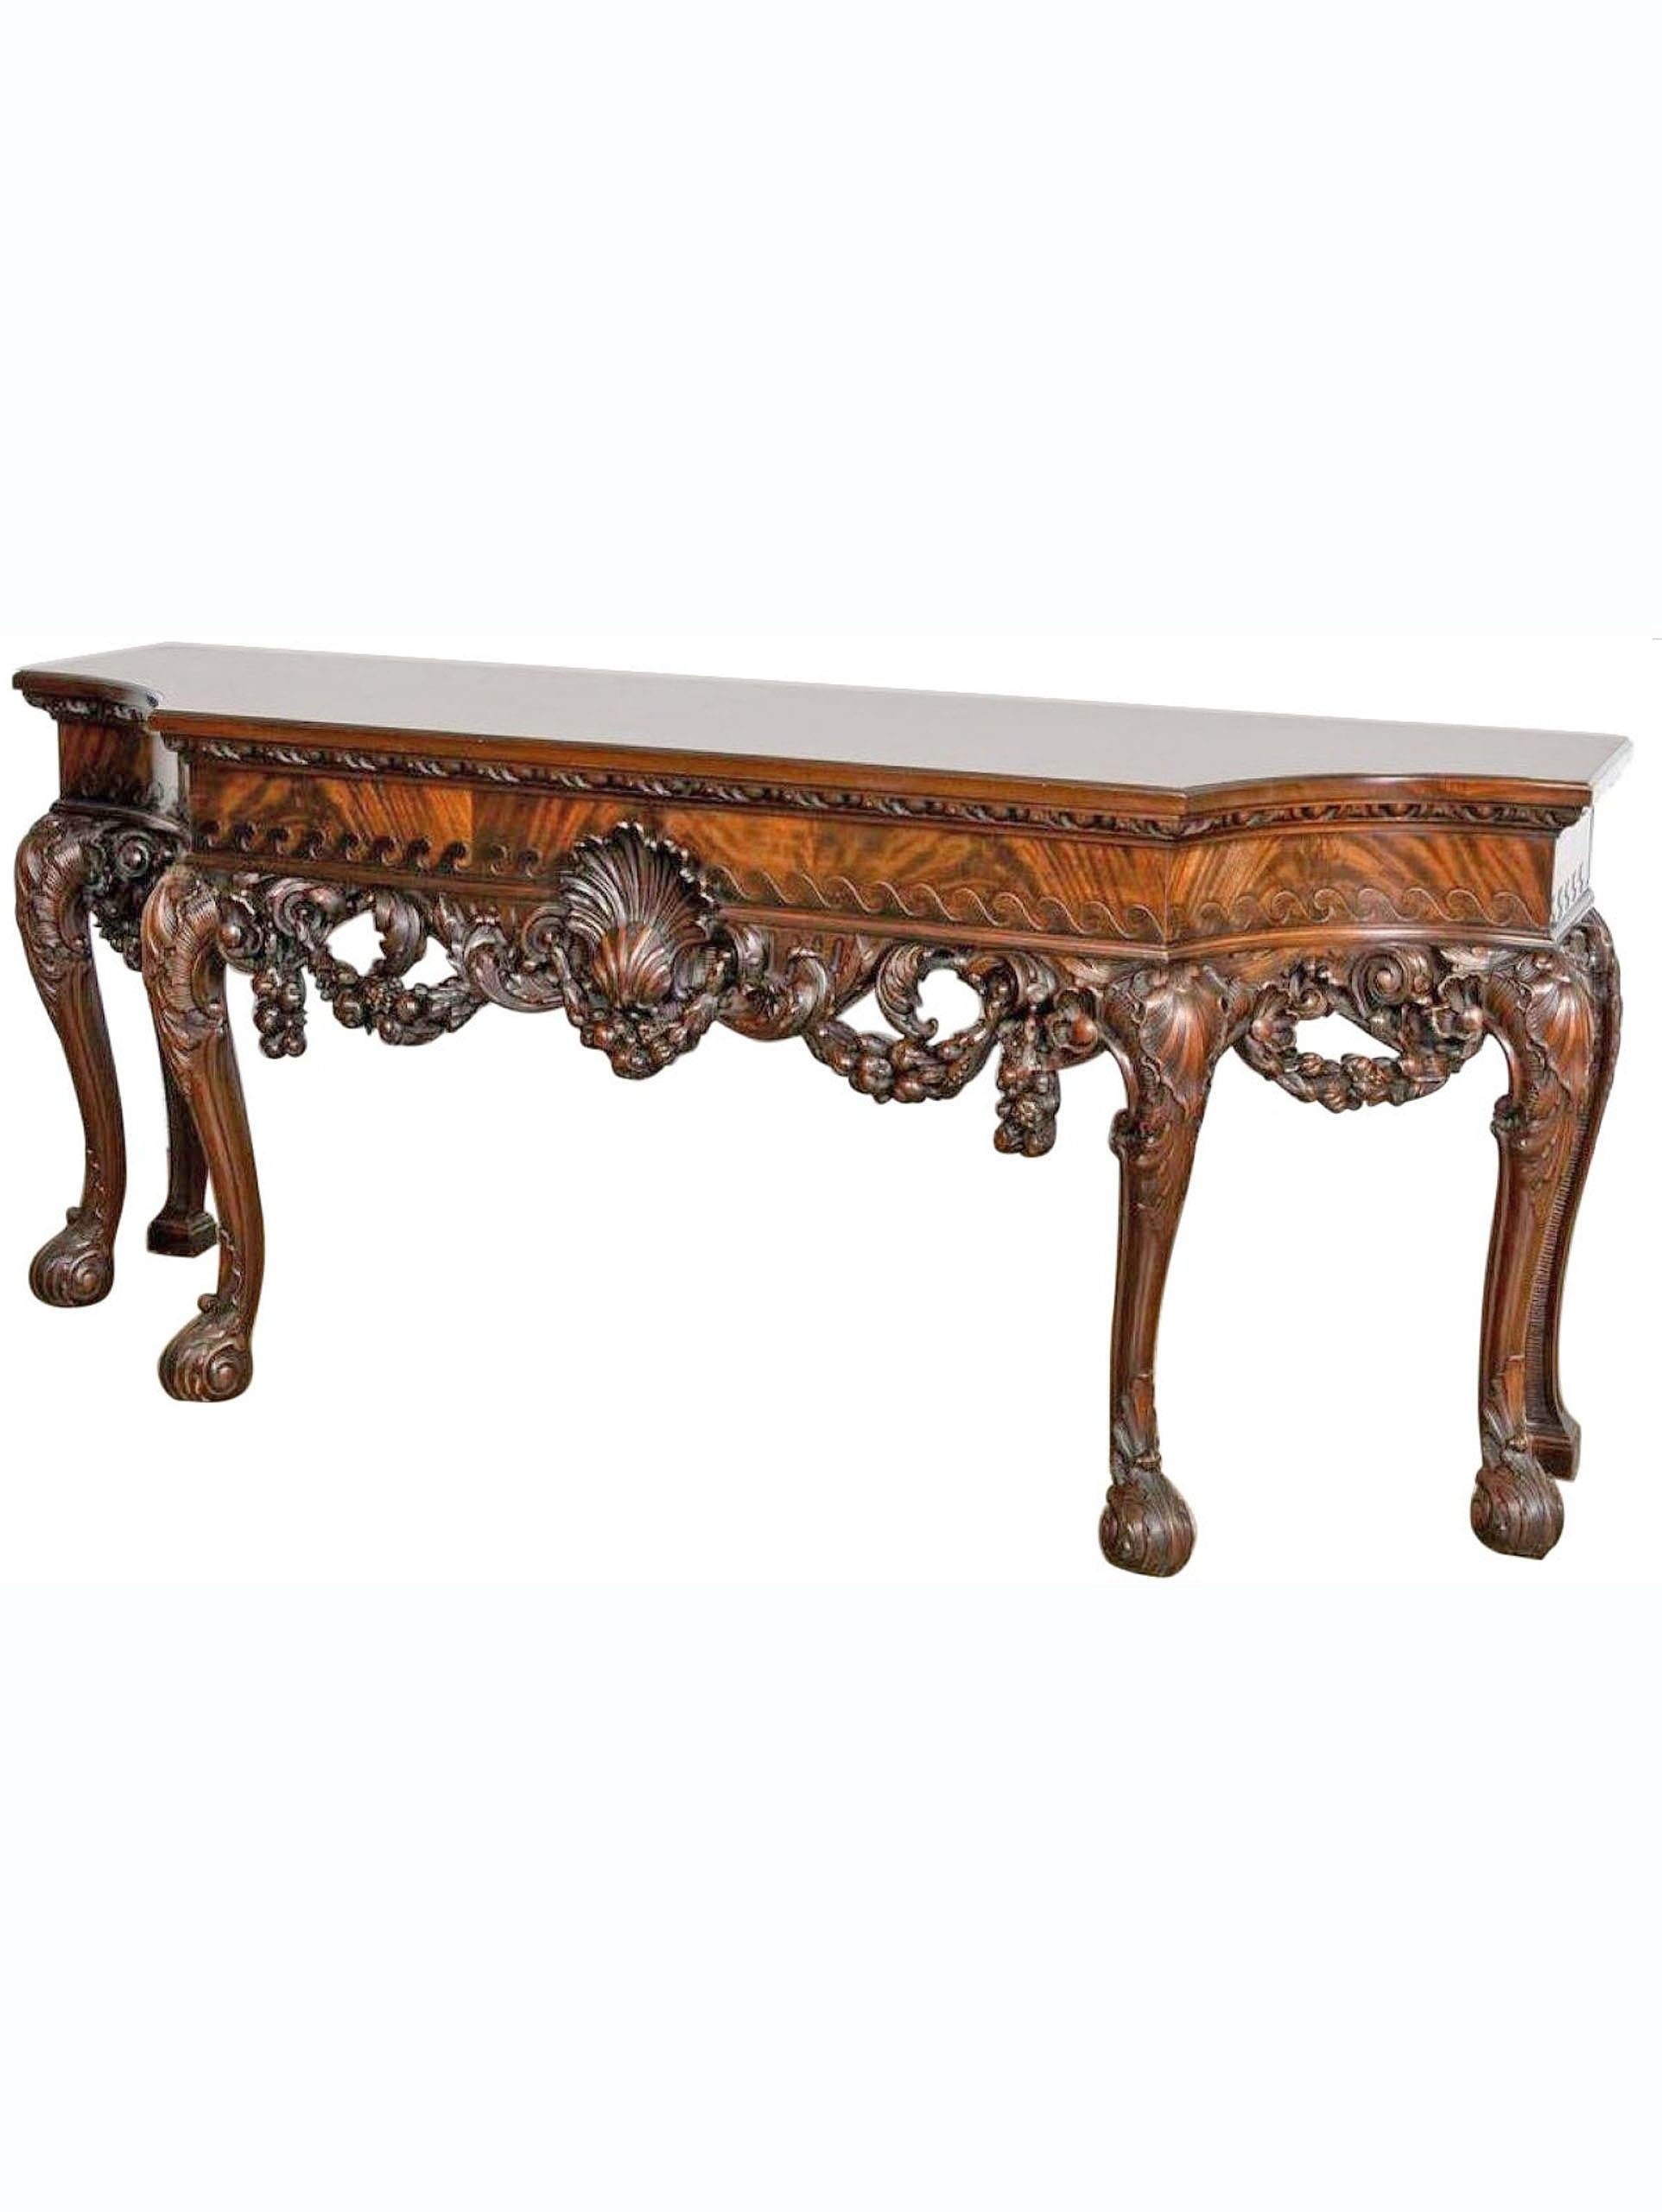 A Fine and well carved English mahogany console table in the George II style having a breakfront form with large scallop shell, the apron with floral and fruit swags, and rising on cabriole legs with acanthus decorated feet. England, circa